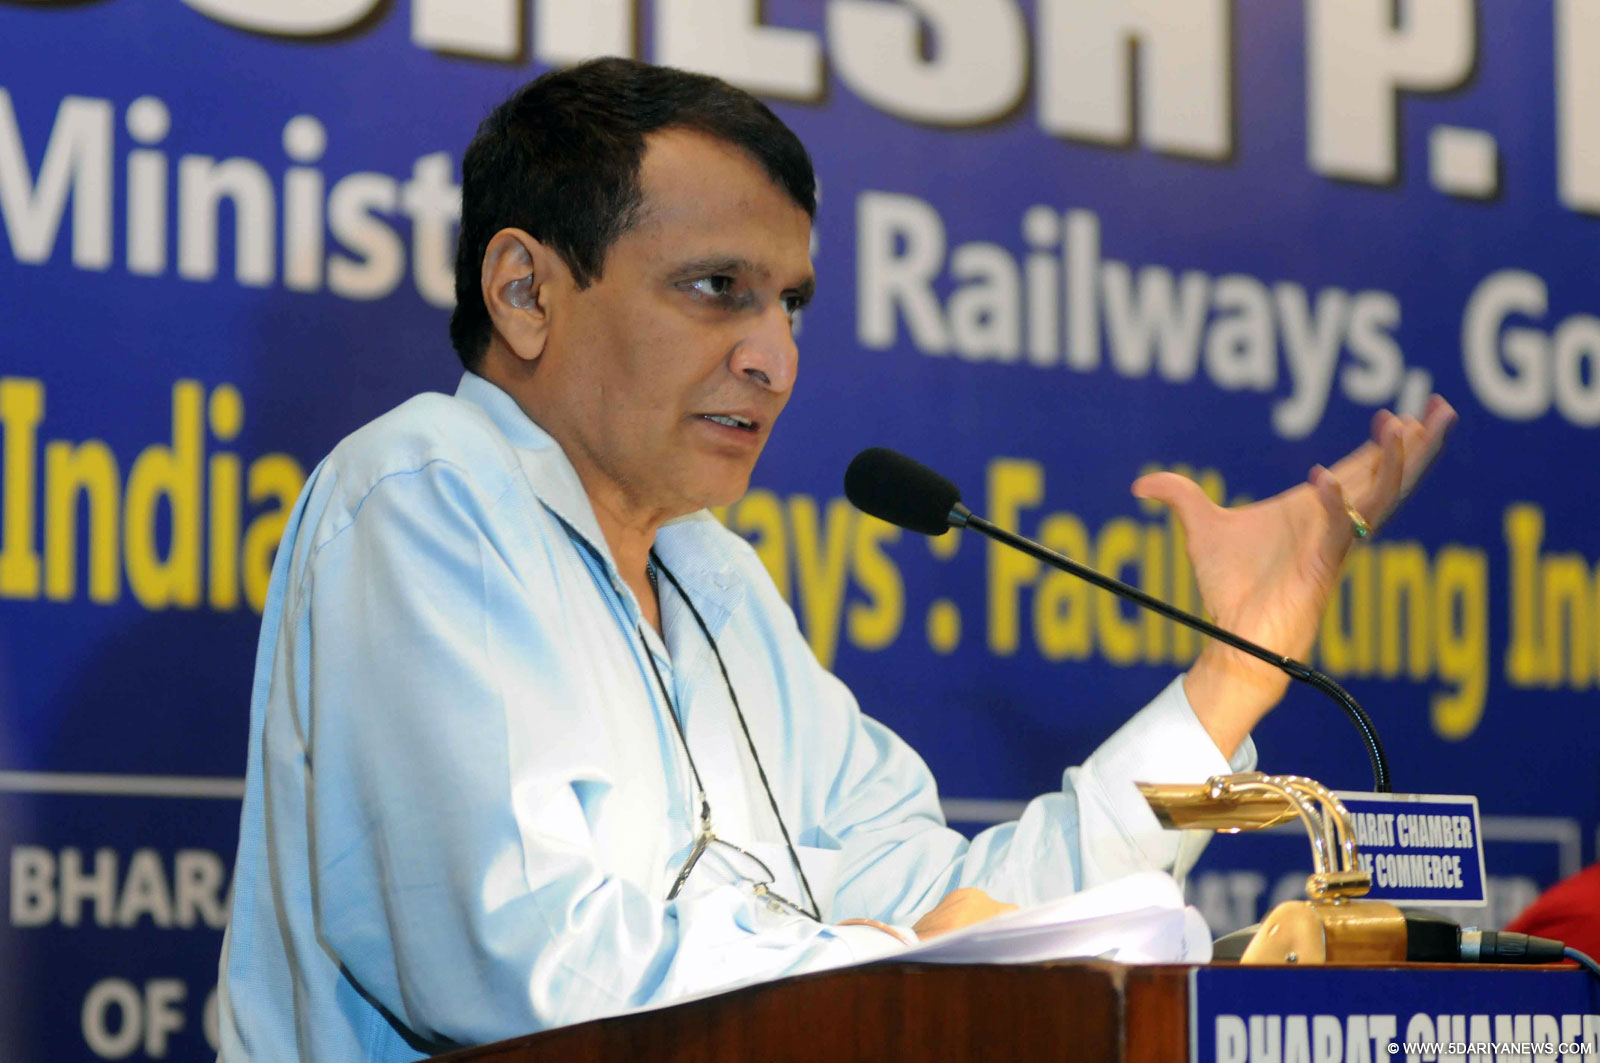 Considering taking services of private security agencies: Suresh Prabhu